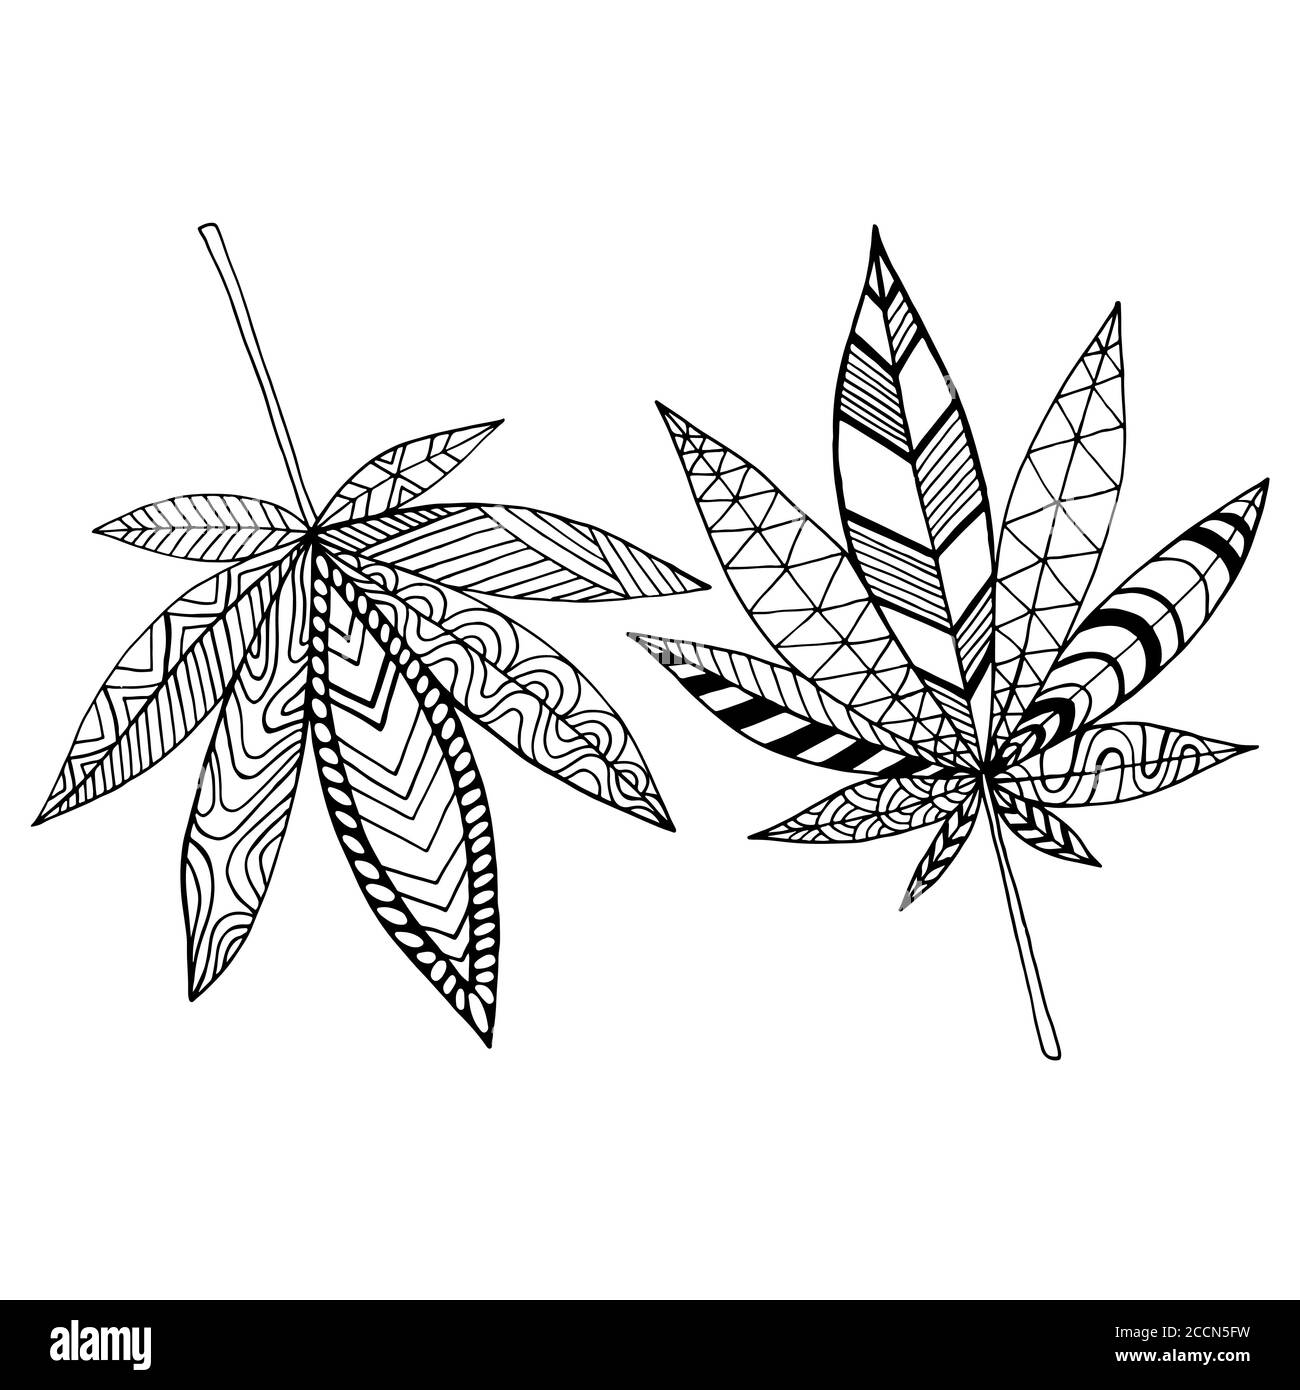 Black and white abstract doodle style psychedelic leaves marijuana coloring page isolated on white background stock vector image art